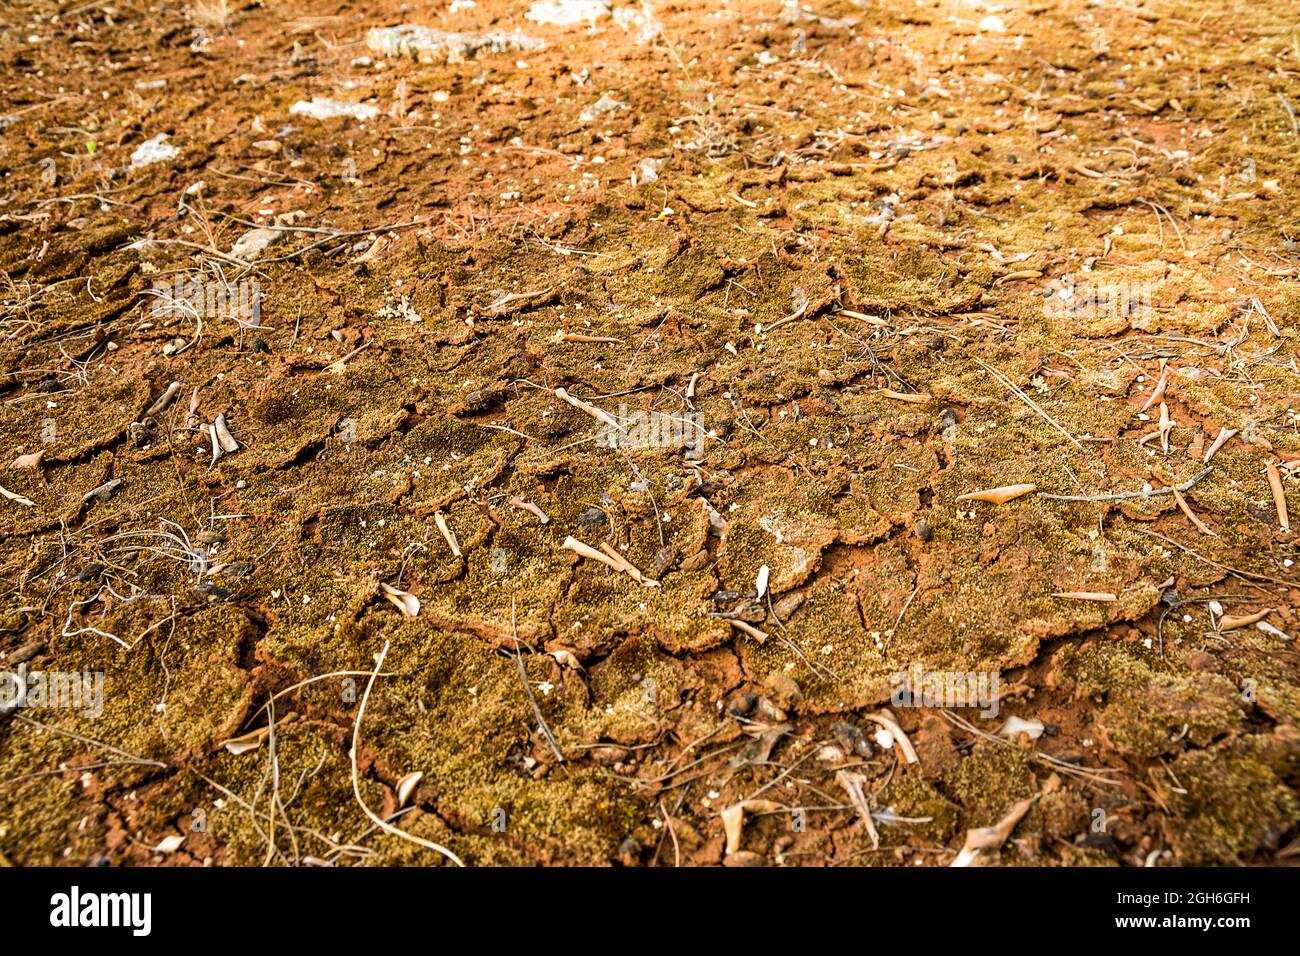 Arid land cracked by drought Stock Photo